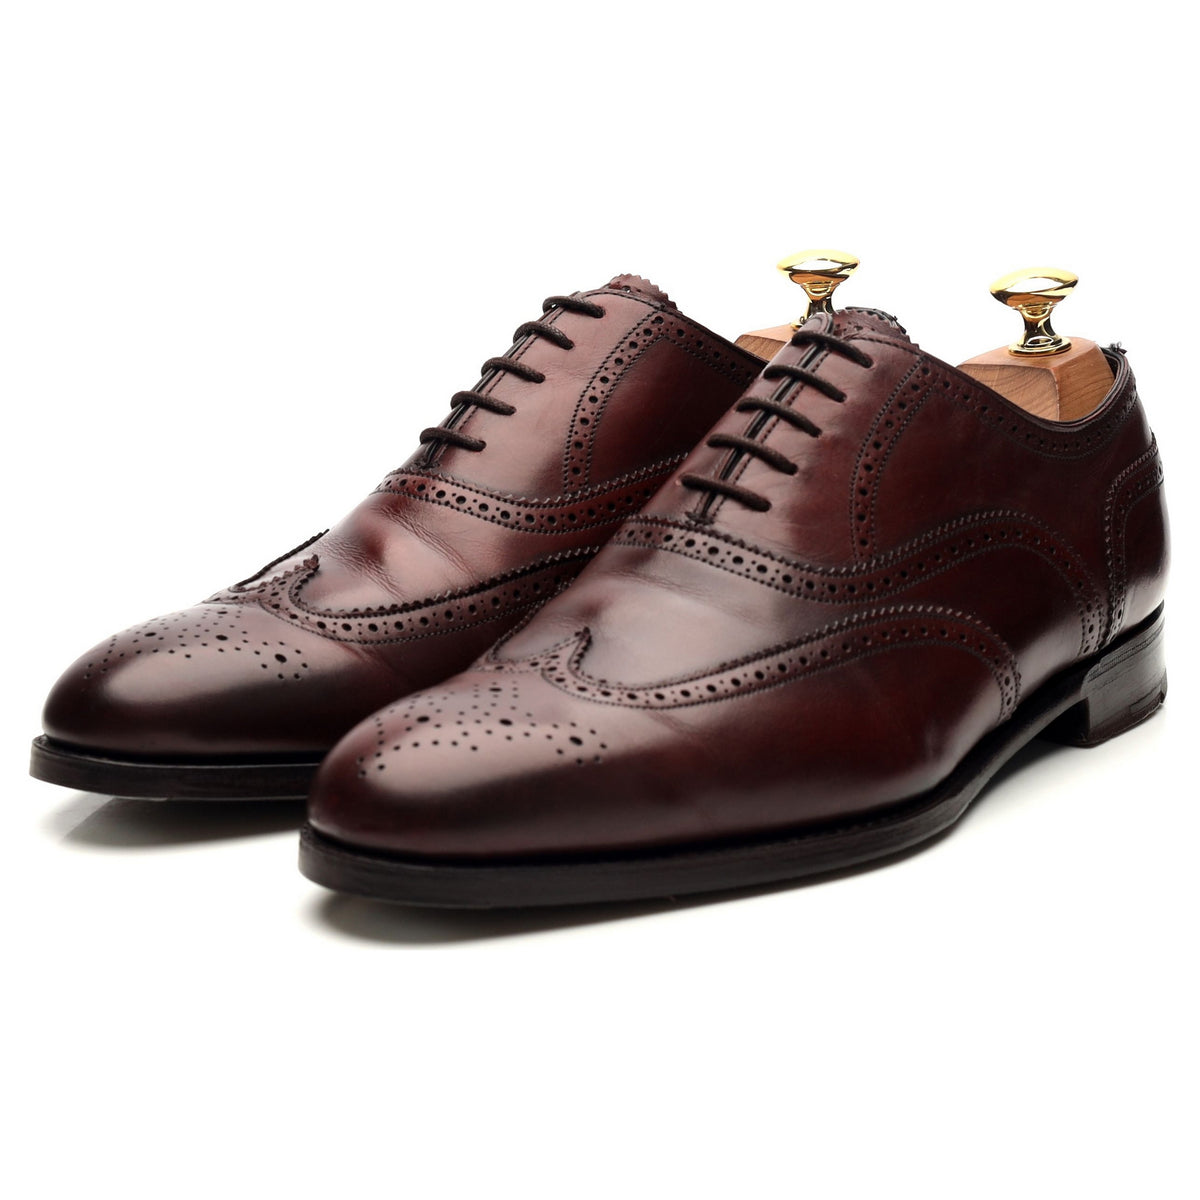 Imperial &#39;Ashburton&#39; Burgundy Leather Oxford Brogues UK 6.5 G